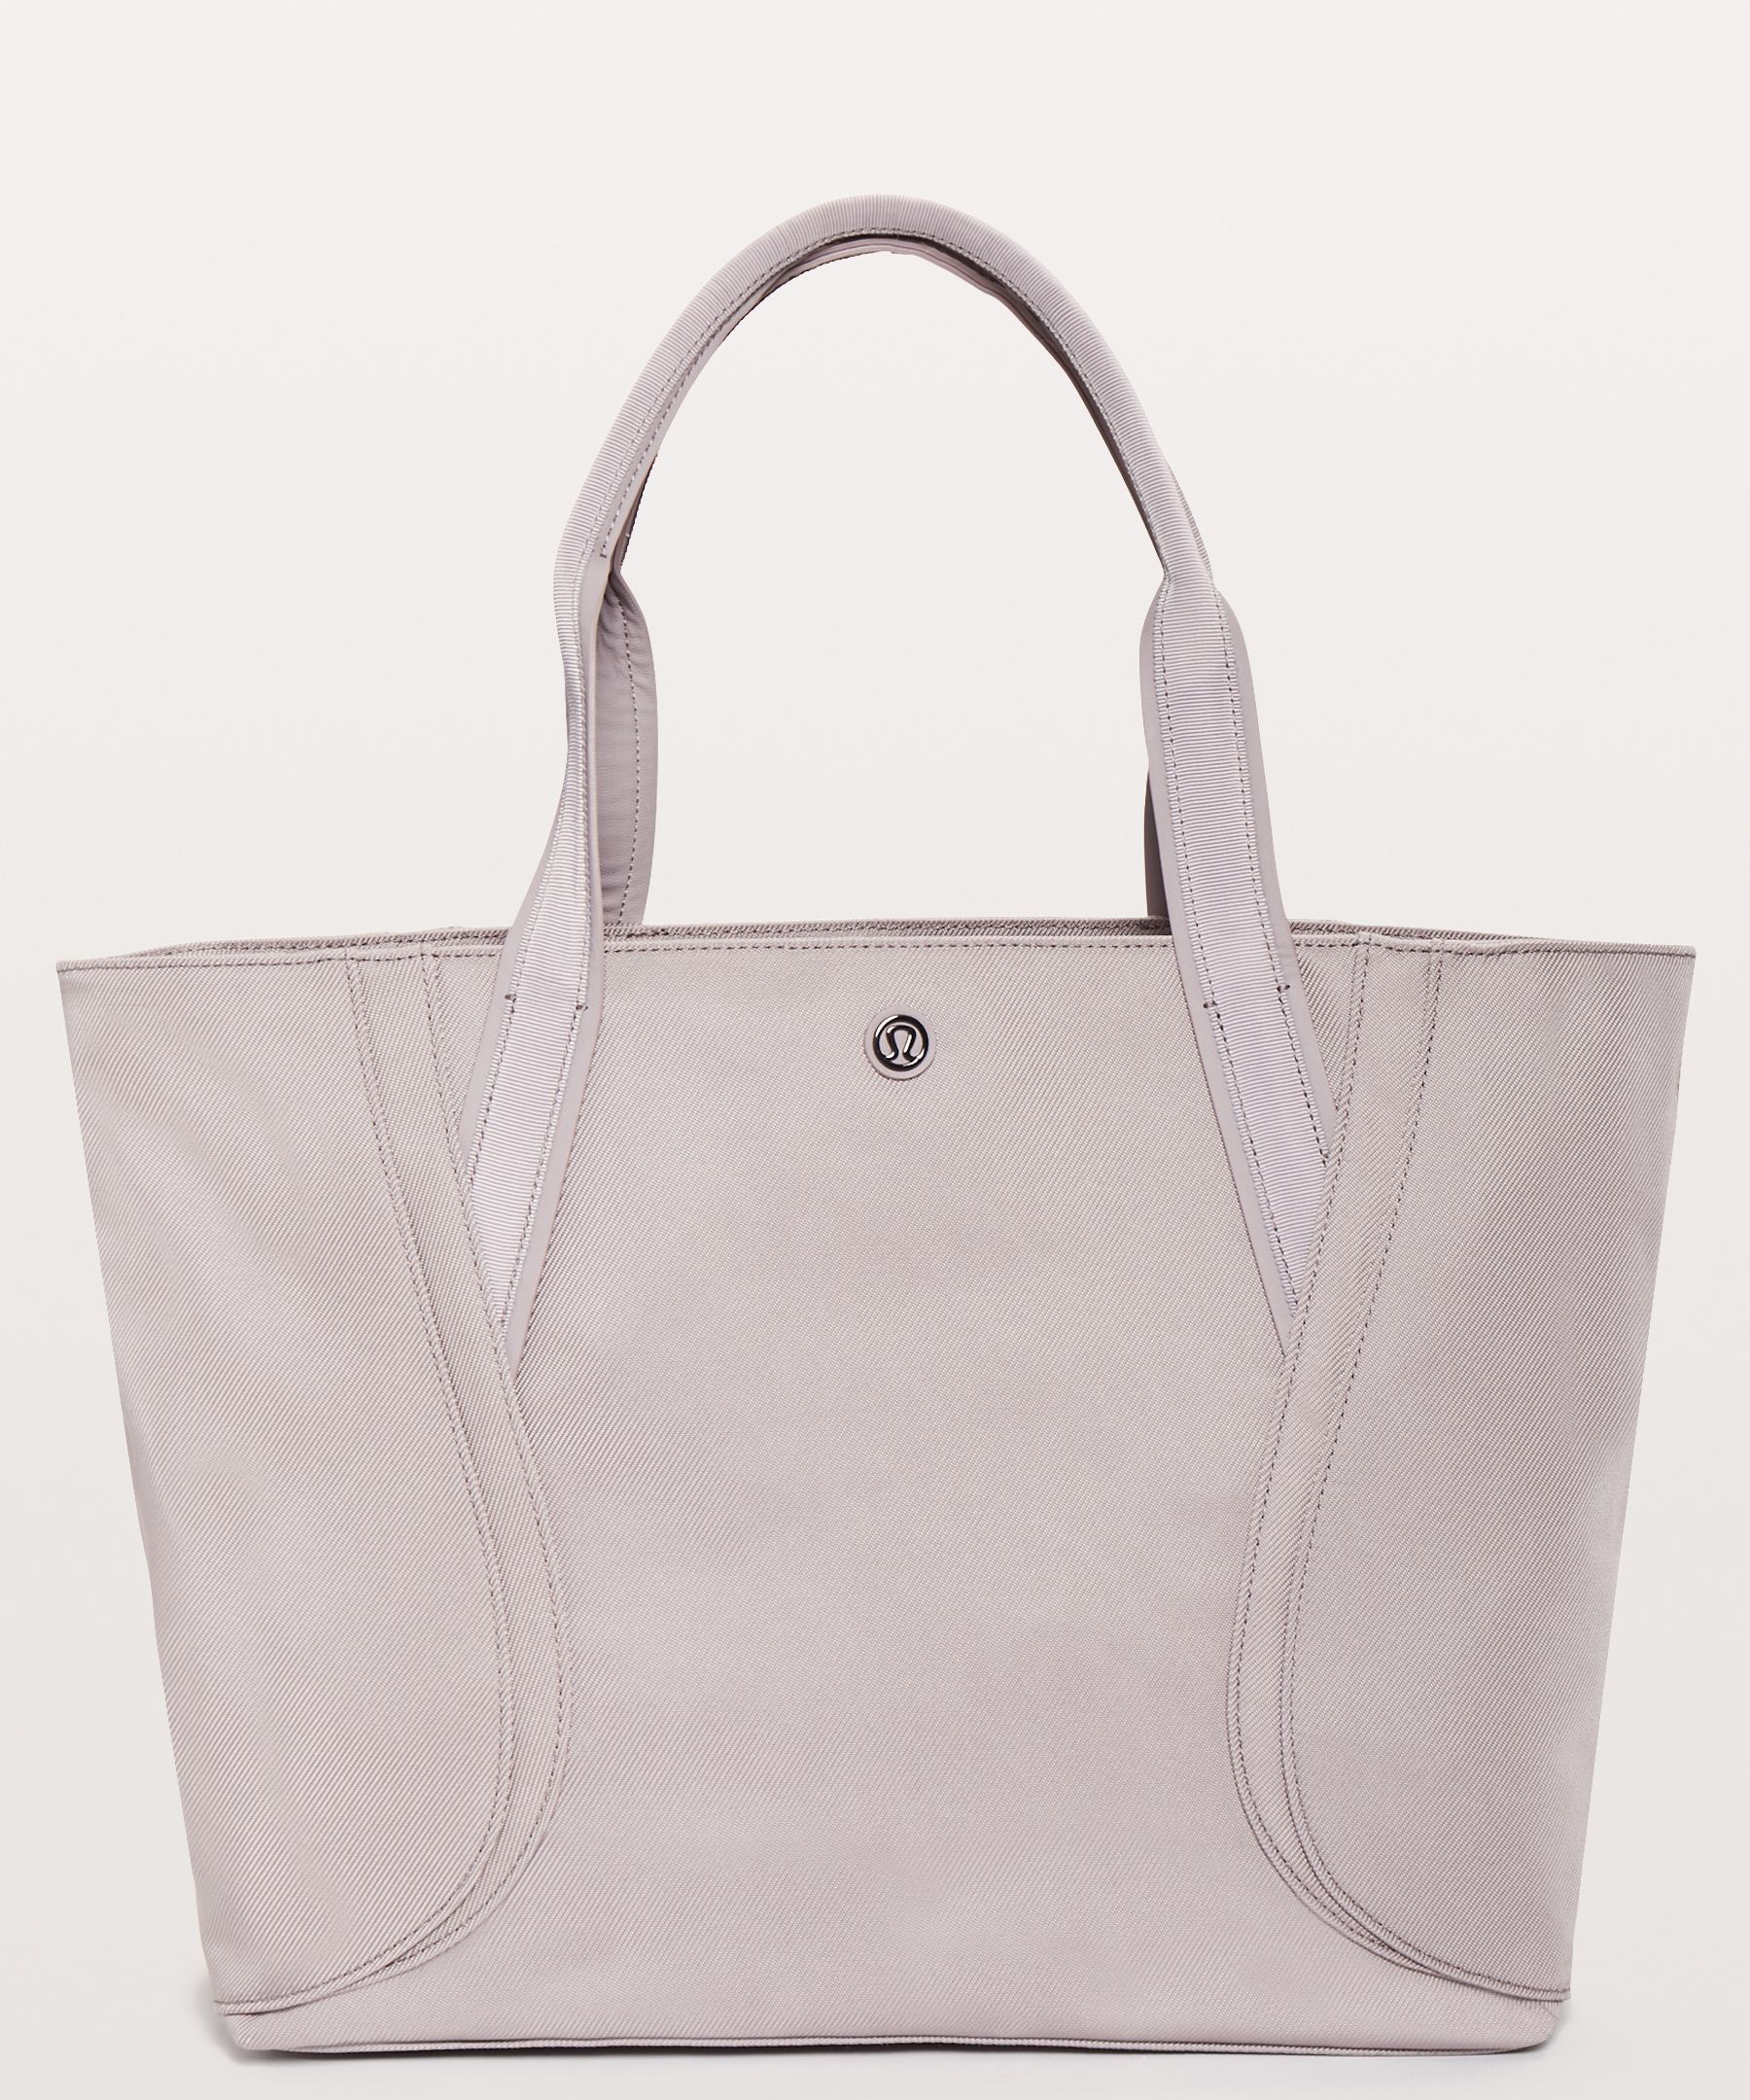 lululemon out of range tote review